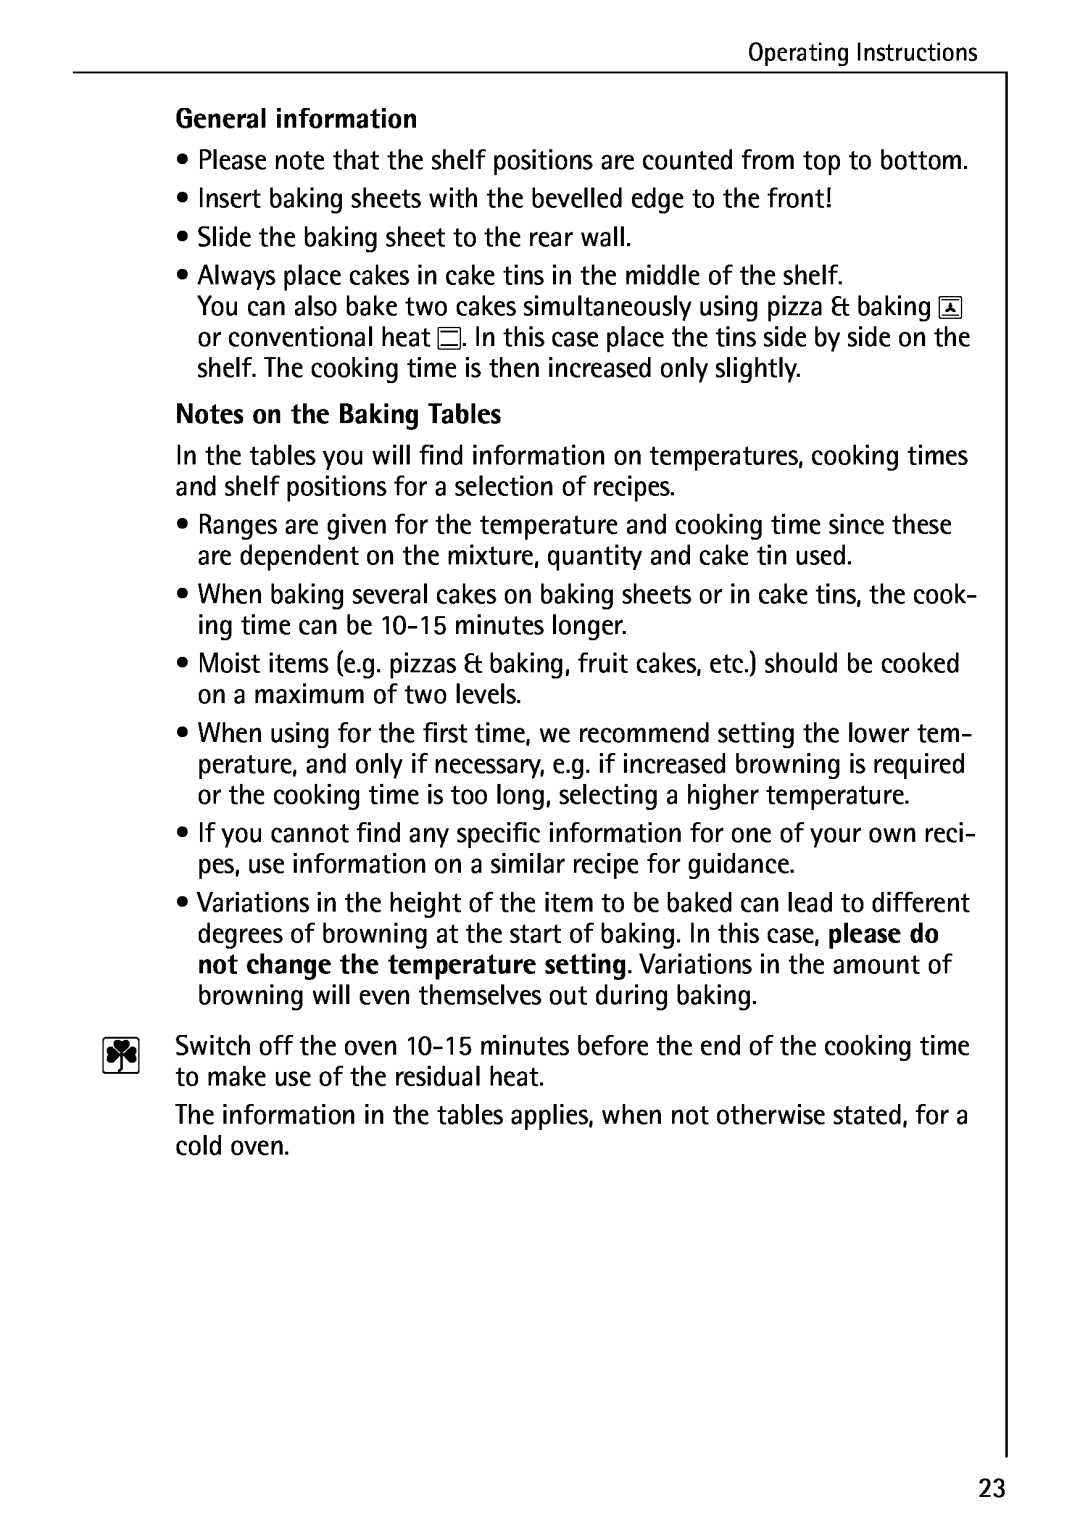 AEG 5033 V operating instructions General information, Notes on the Baking Tables 